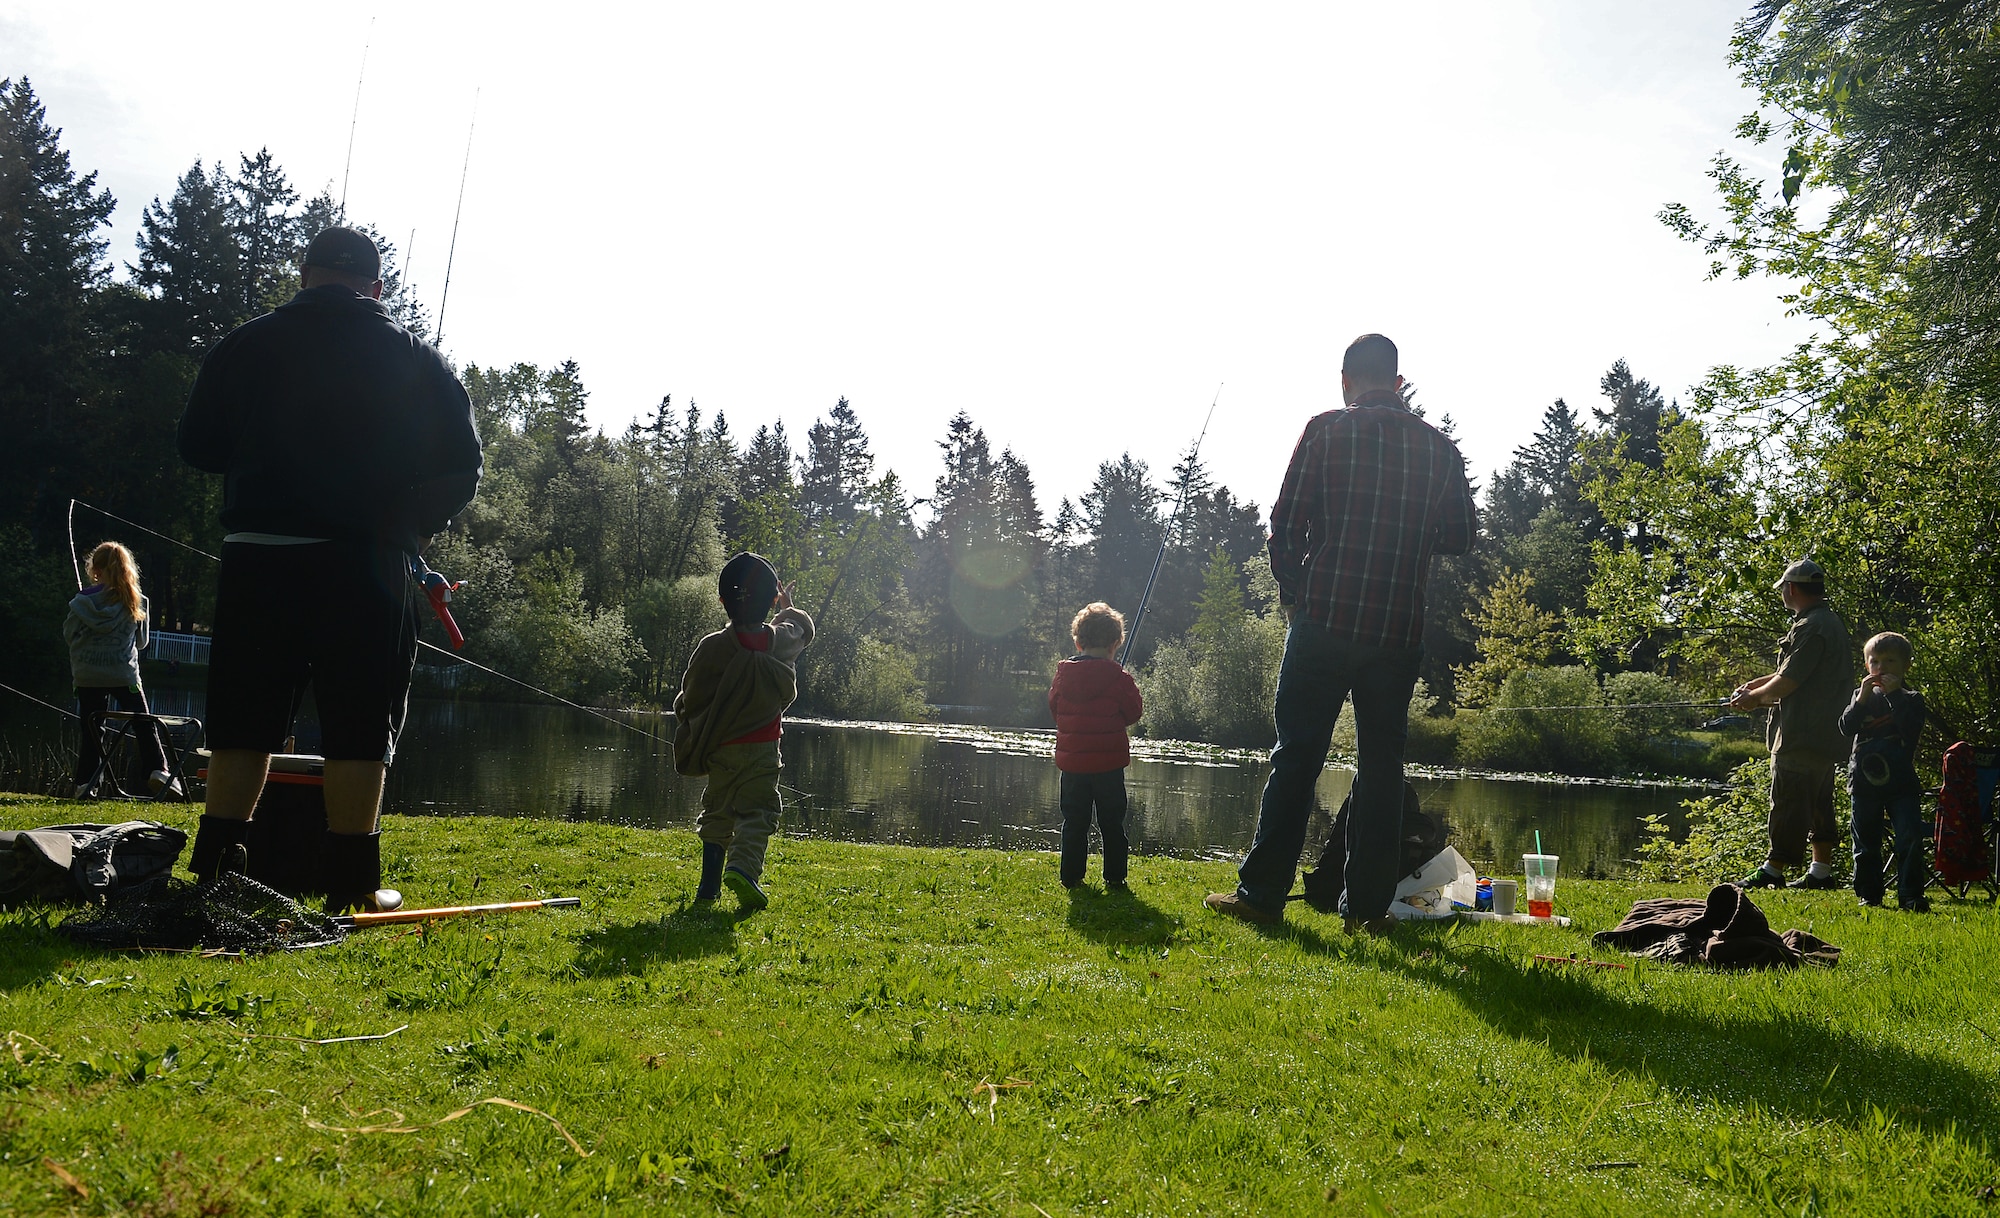 The Big One: Kids line up for Alliance fishing derby